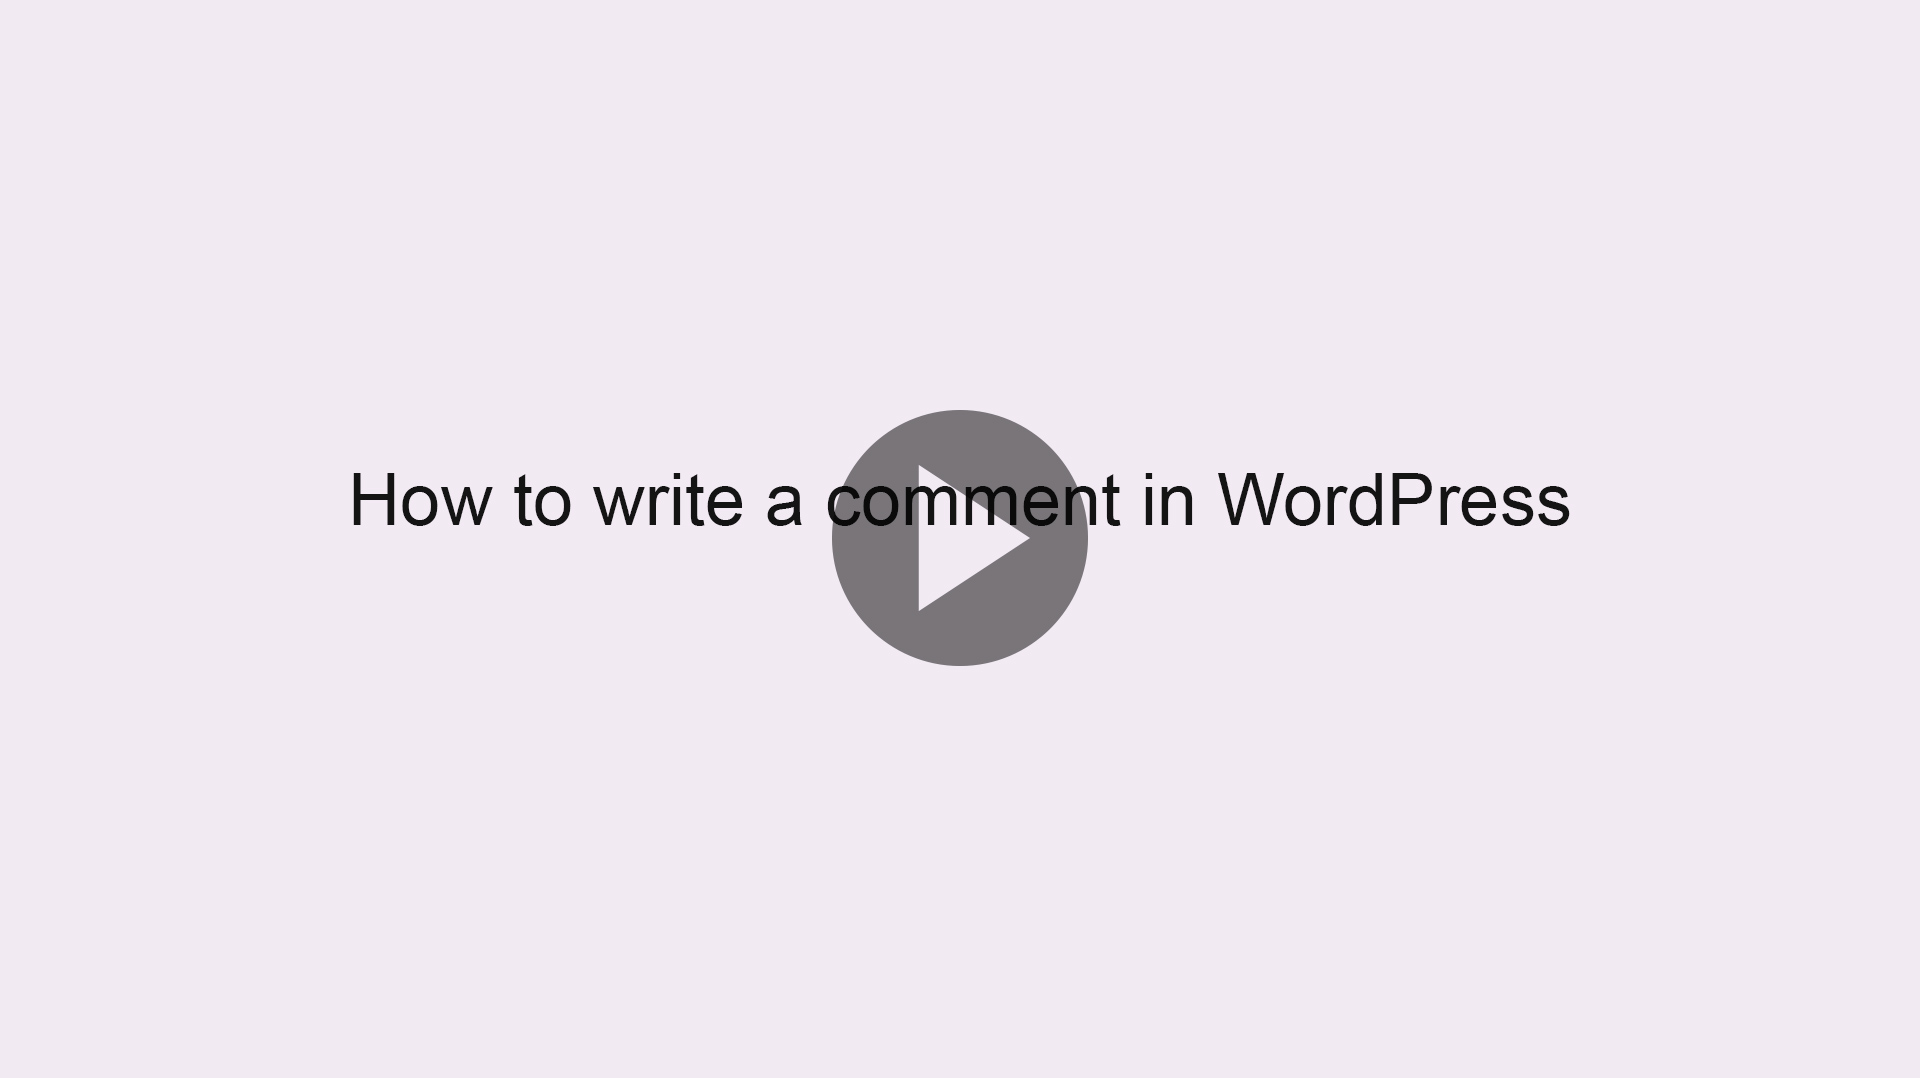 How to write a comment in WordPress